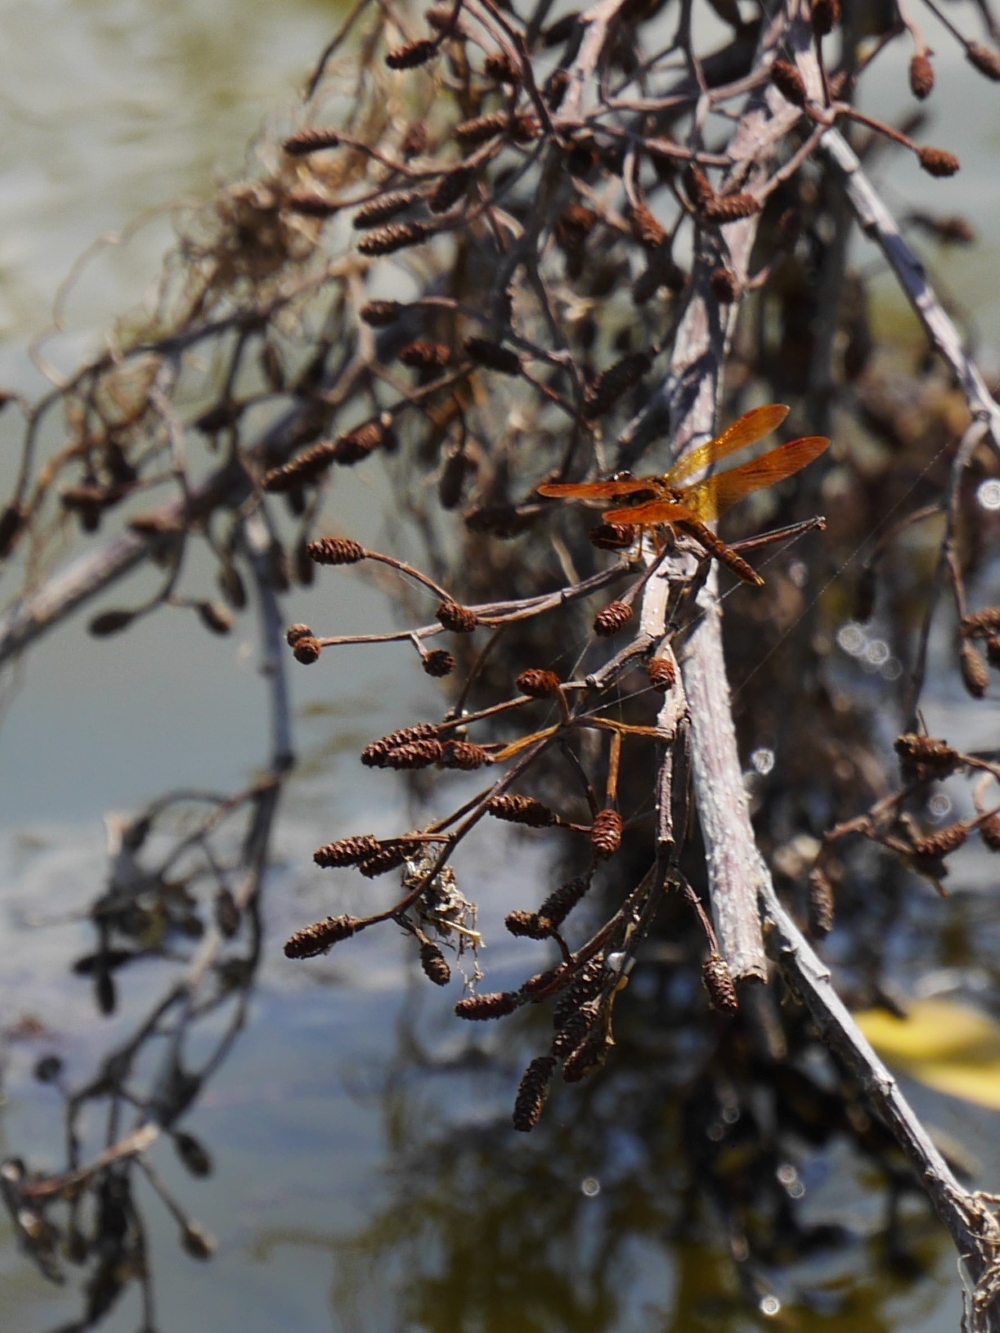 A dragonfly with a red body and orange wings perches on a branch over water.